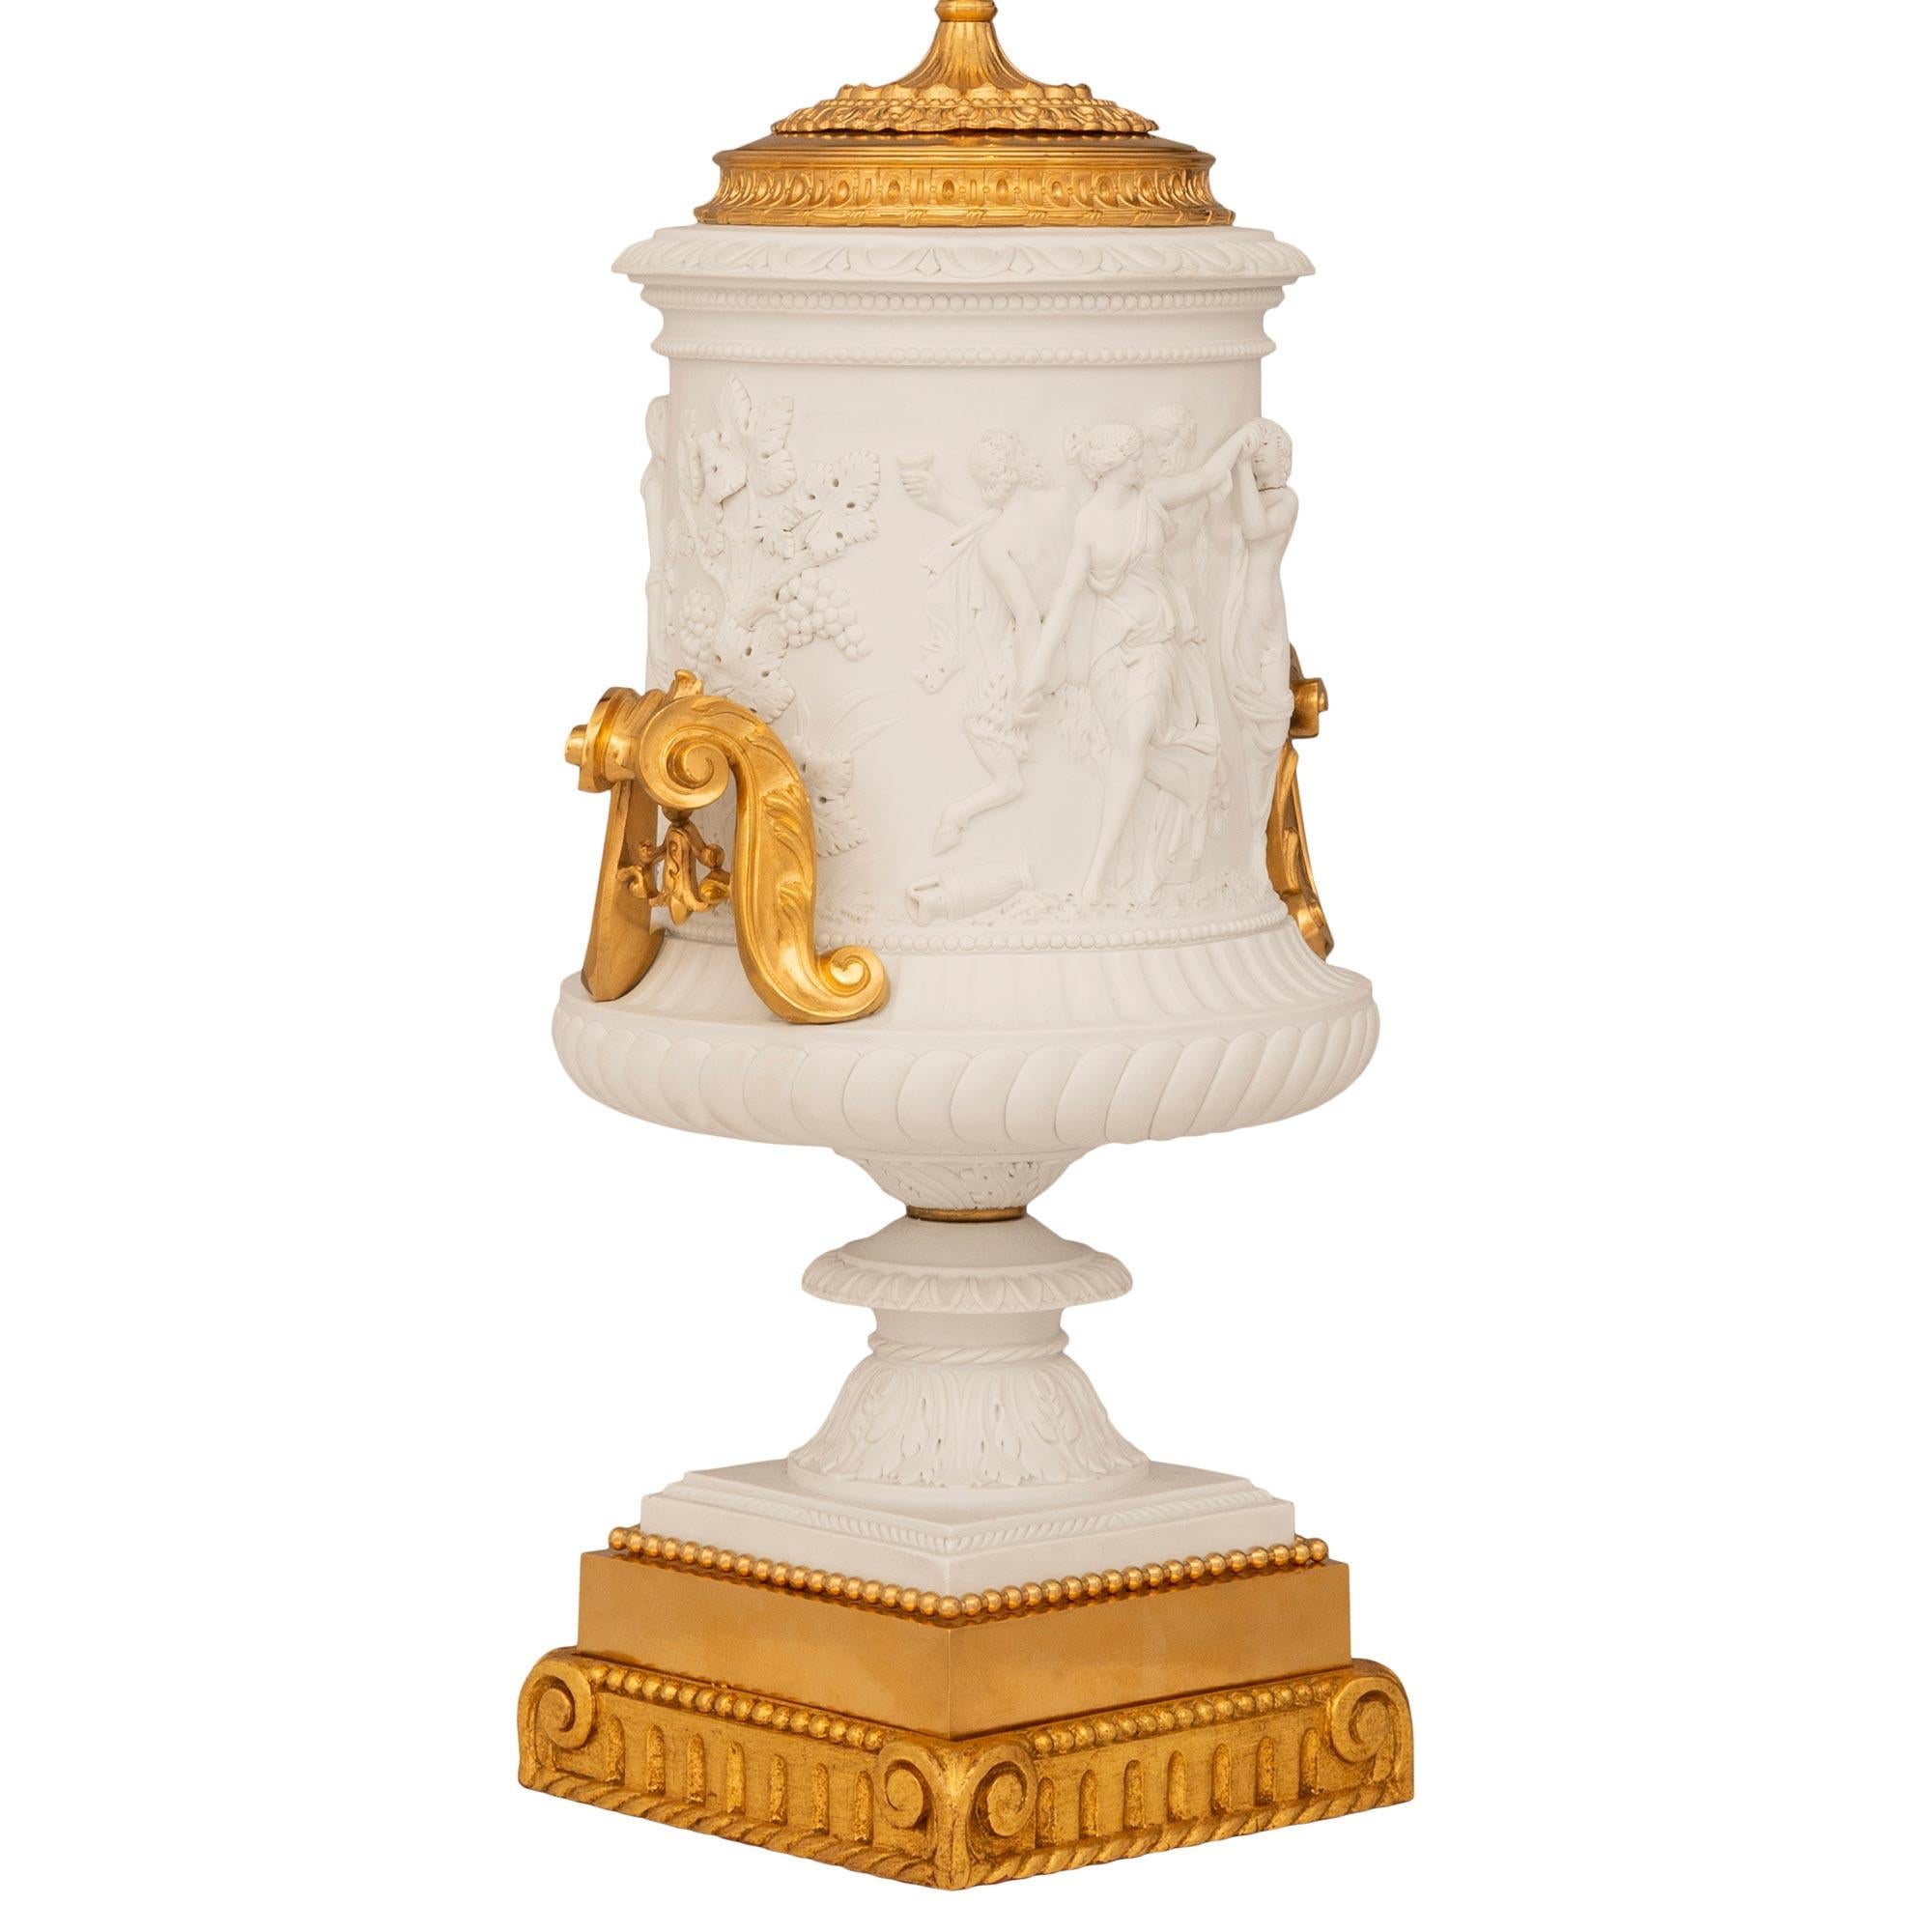 A stunning and high quality pair of French 19th century Renaissance st. Bisque Porcelain, Ormolu, and Giltwood lamps, attributed to Sèvres. Each wonderful lamp is raised on a square Giltwood fluted pedestal with a spiral bottom edge and scrolling